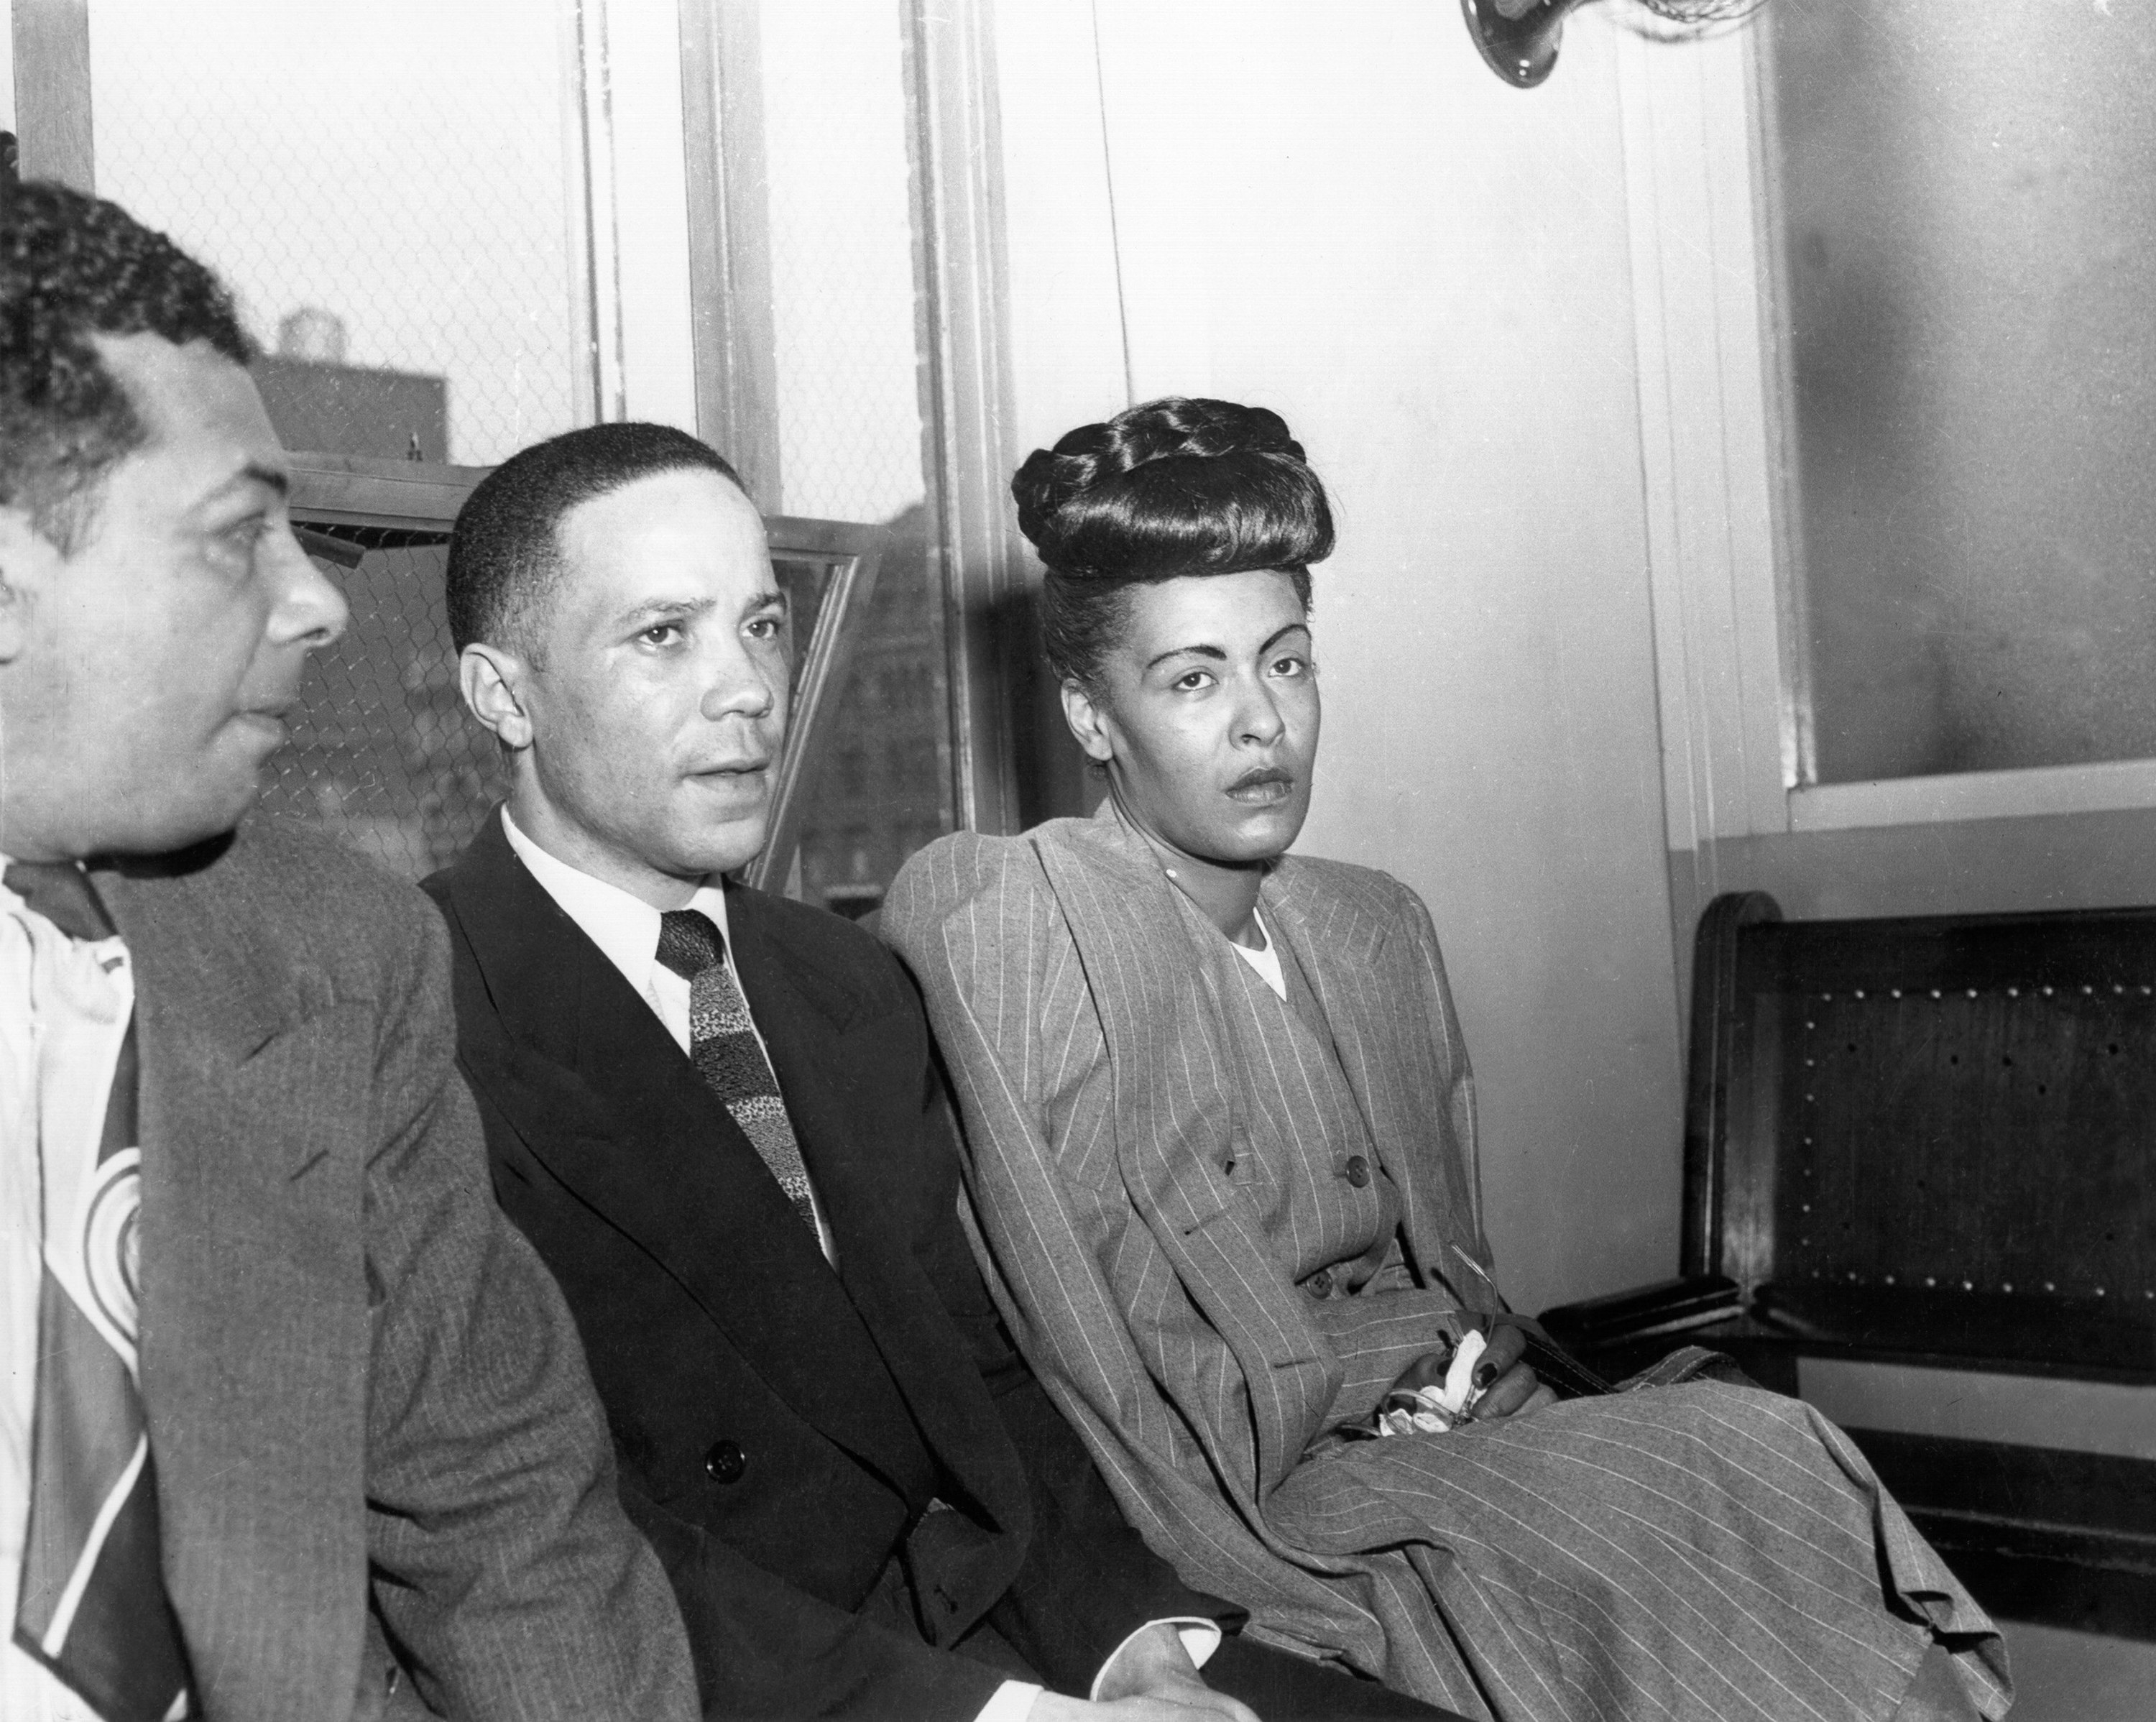 Billie Holiday wearing a skirt suit near a court room